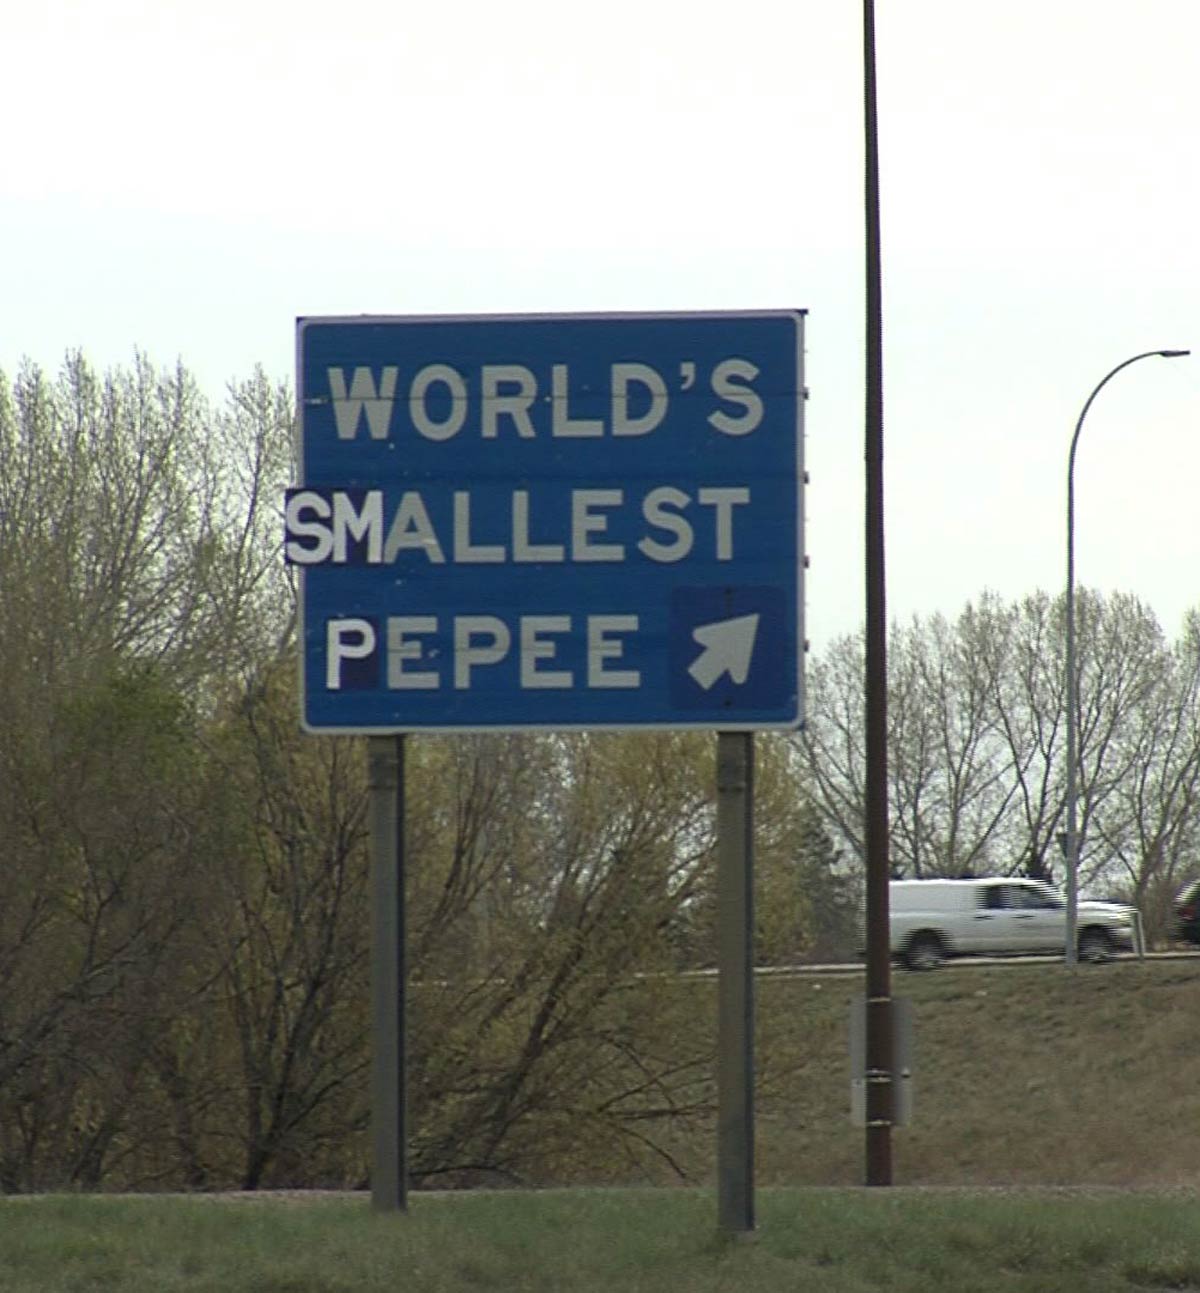 Our City is proud to have the World's largest TeePee. Someone vandalized the sign last night..